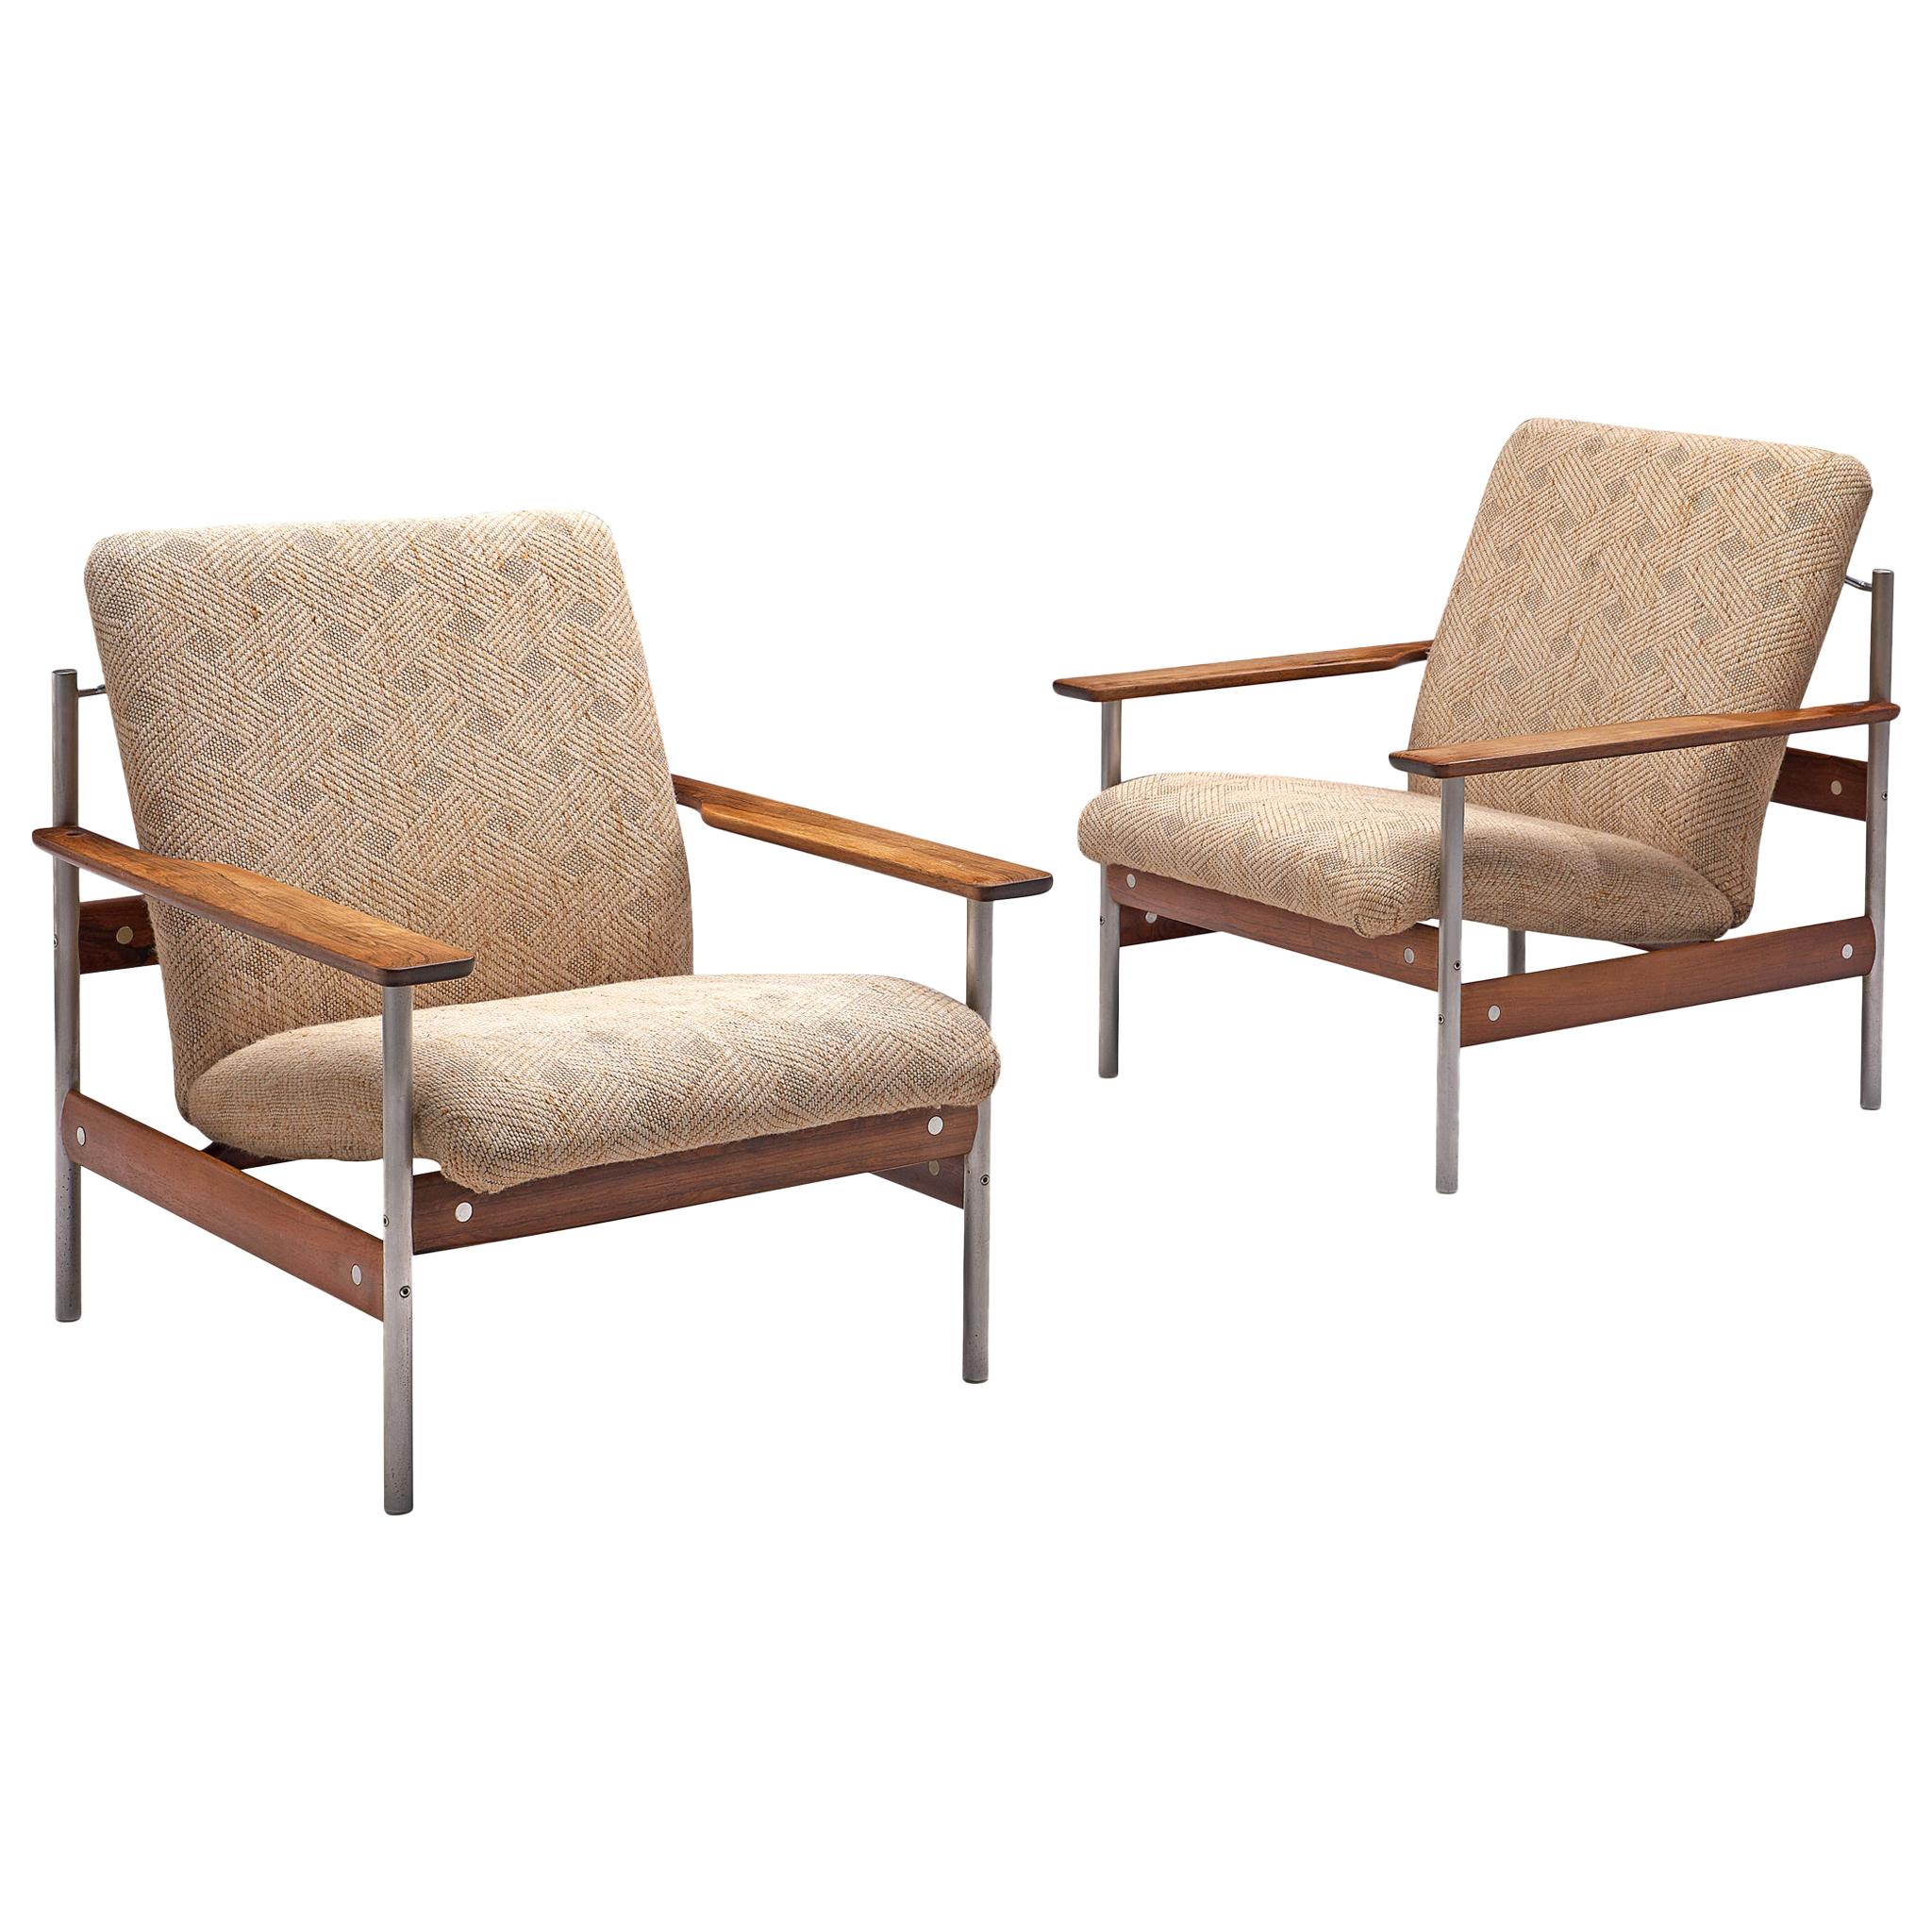 Norwegian Lounge Chairs by Sven Ivar Dysthe in Beige Fabric